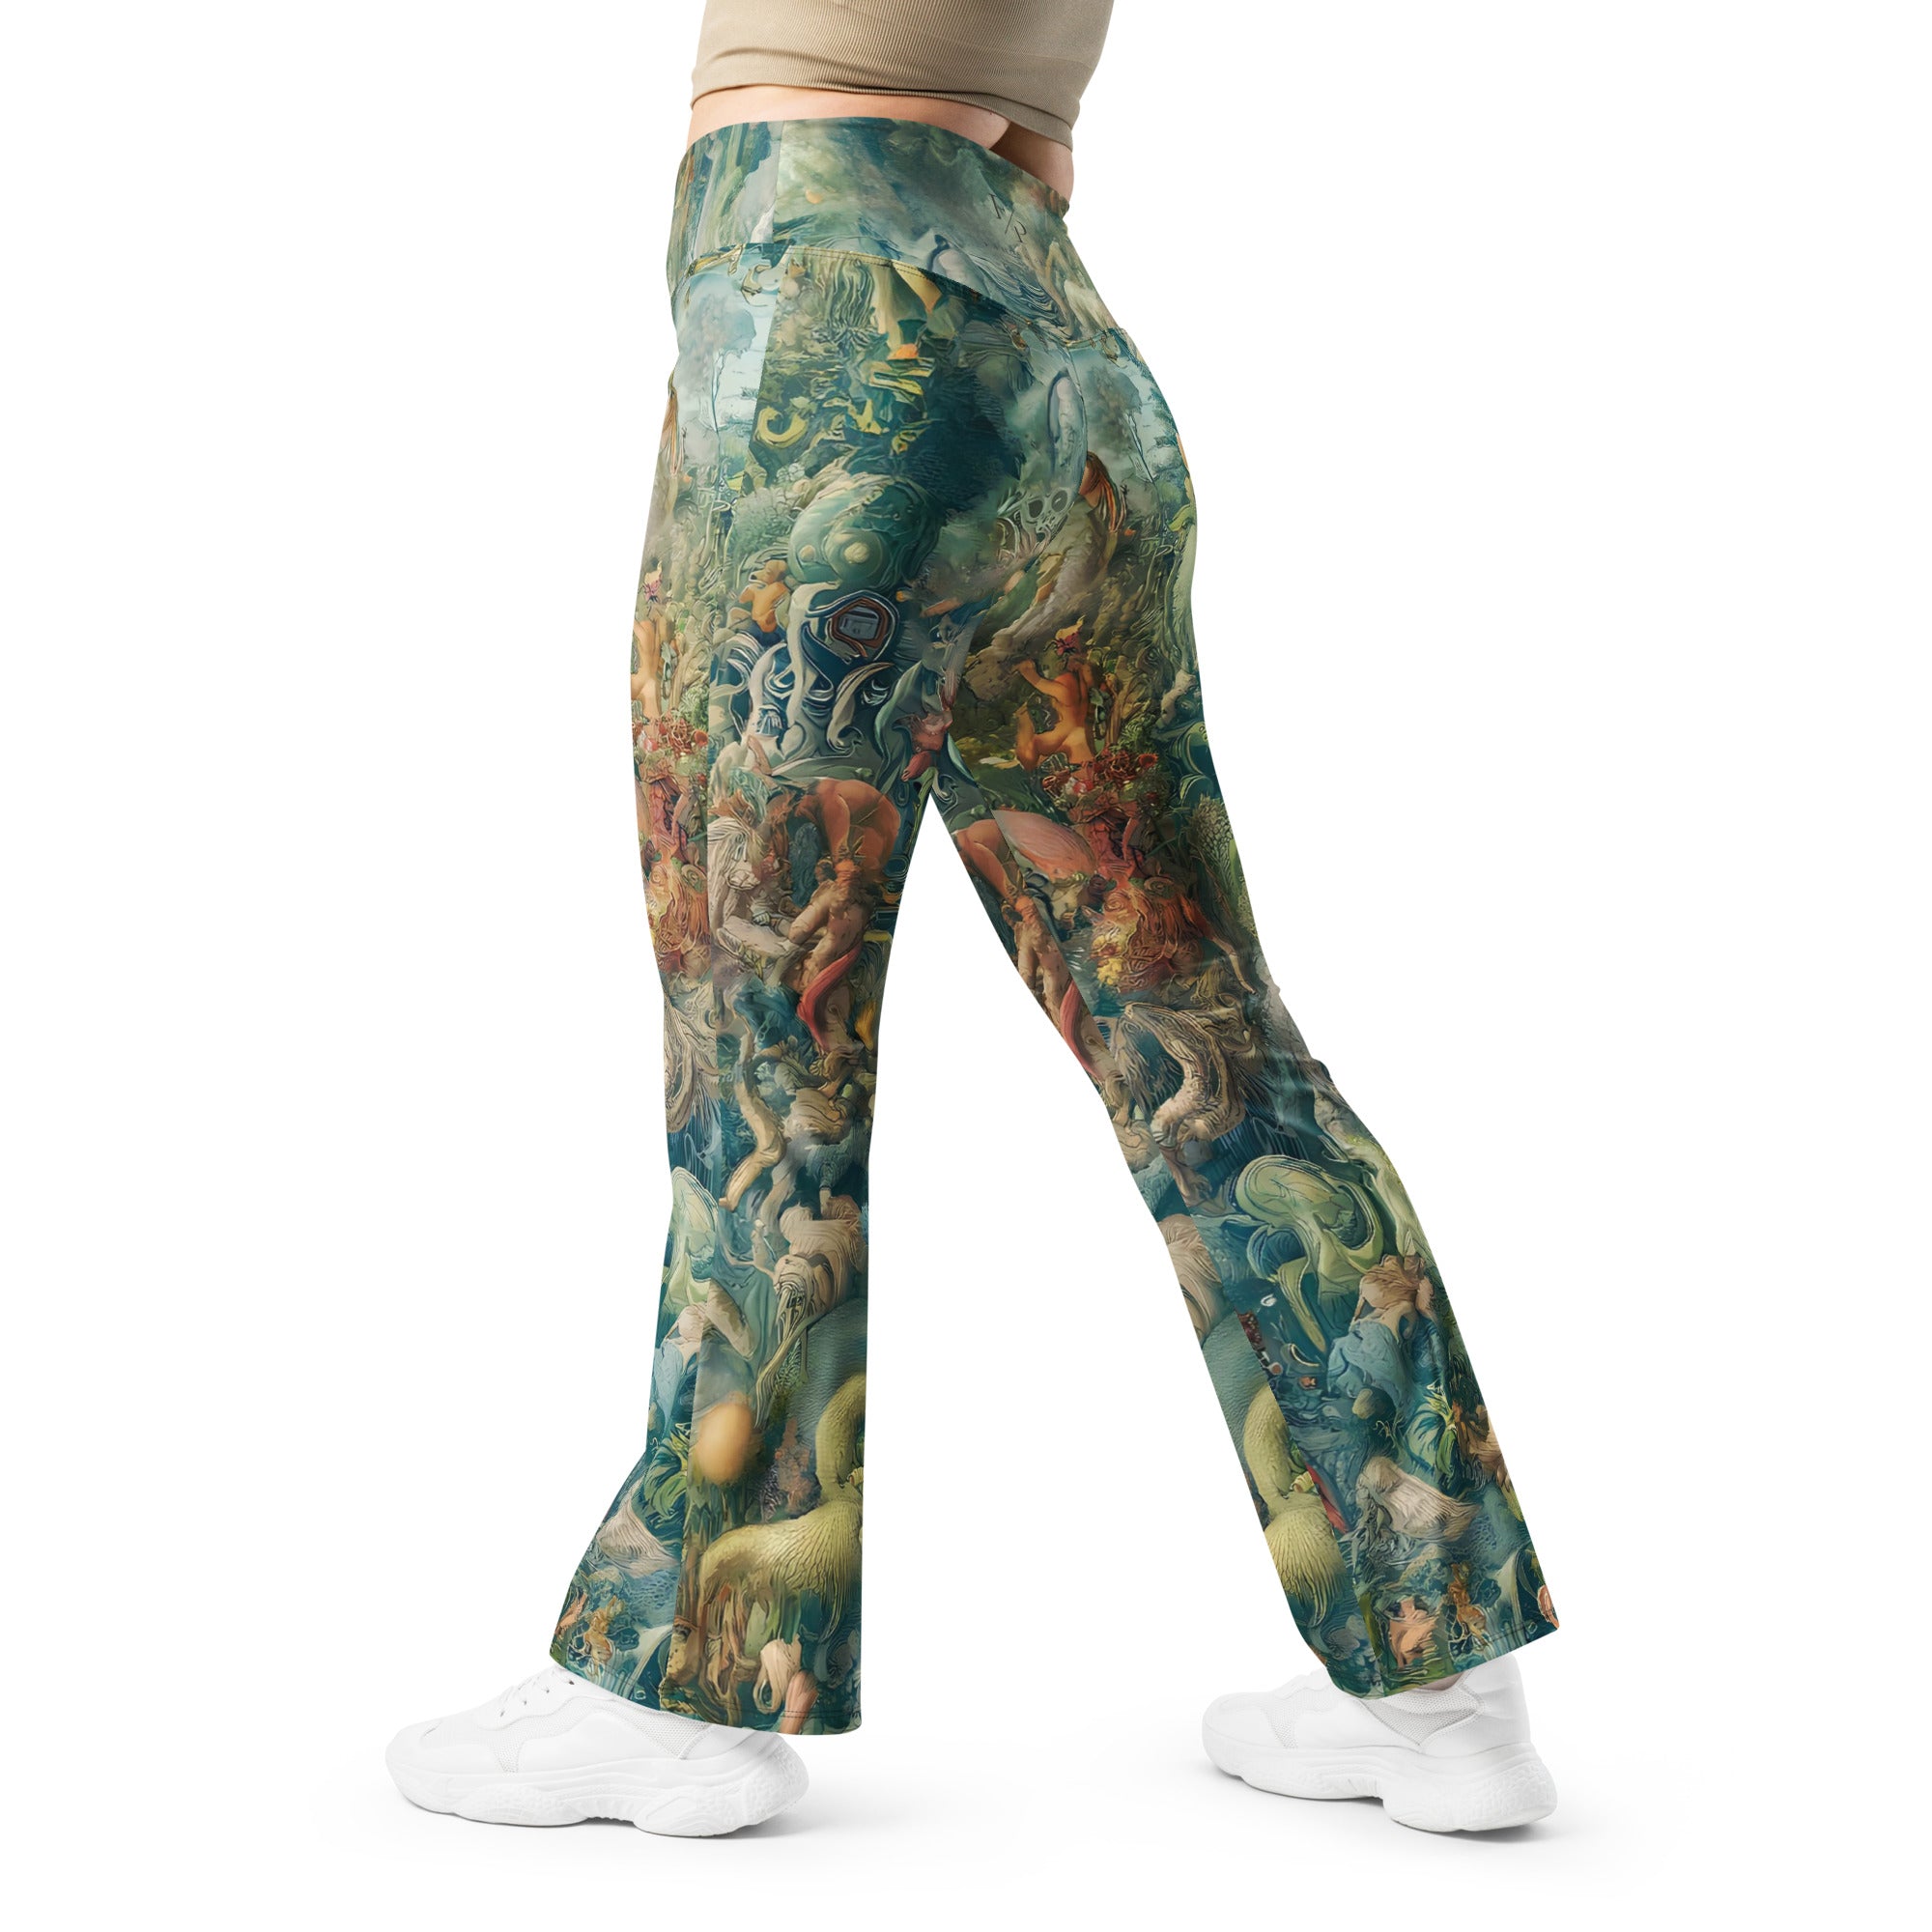 Hieronymus Bosch 'The Garden of Earthly Delights' Famous Painting Flare Leggings | Premium Art Flare Leggings